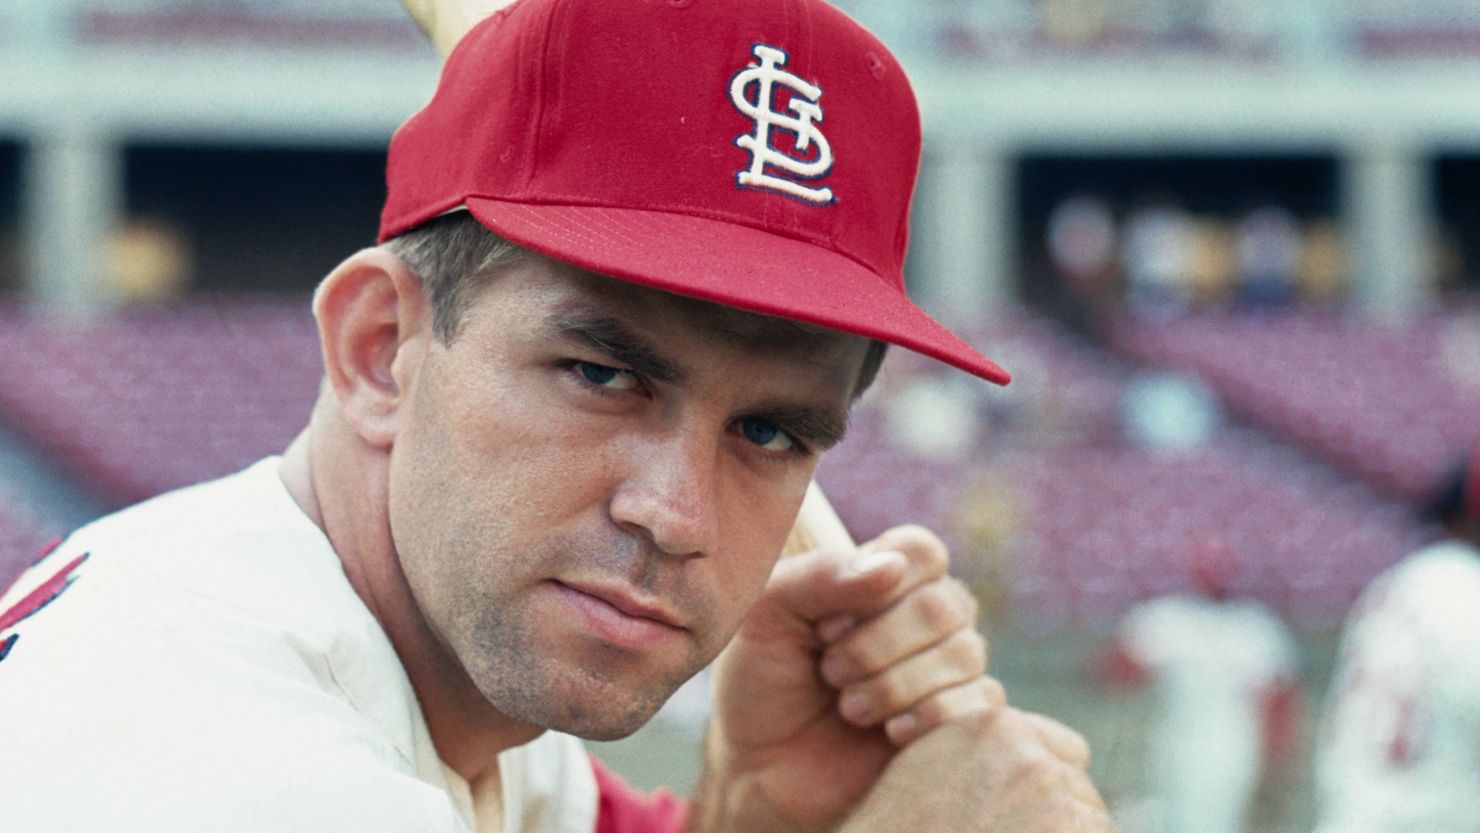  Tim McCarver spent most of his playing career with the St. Louis Cardinals.